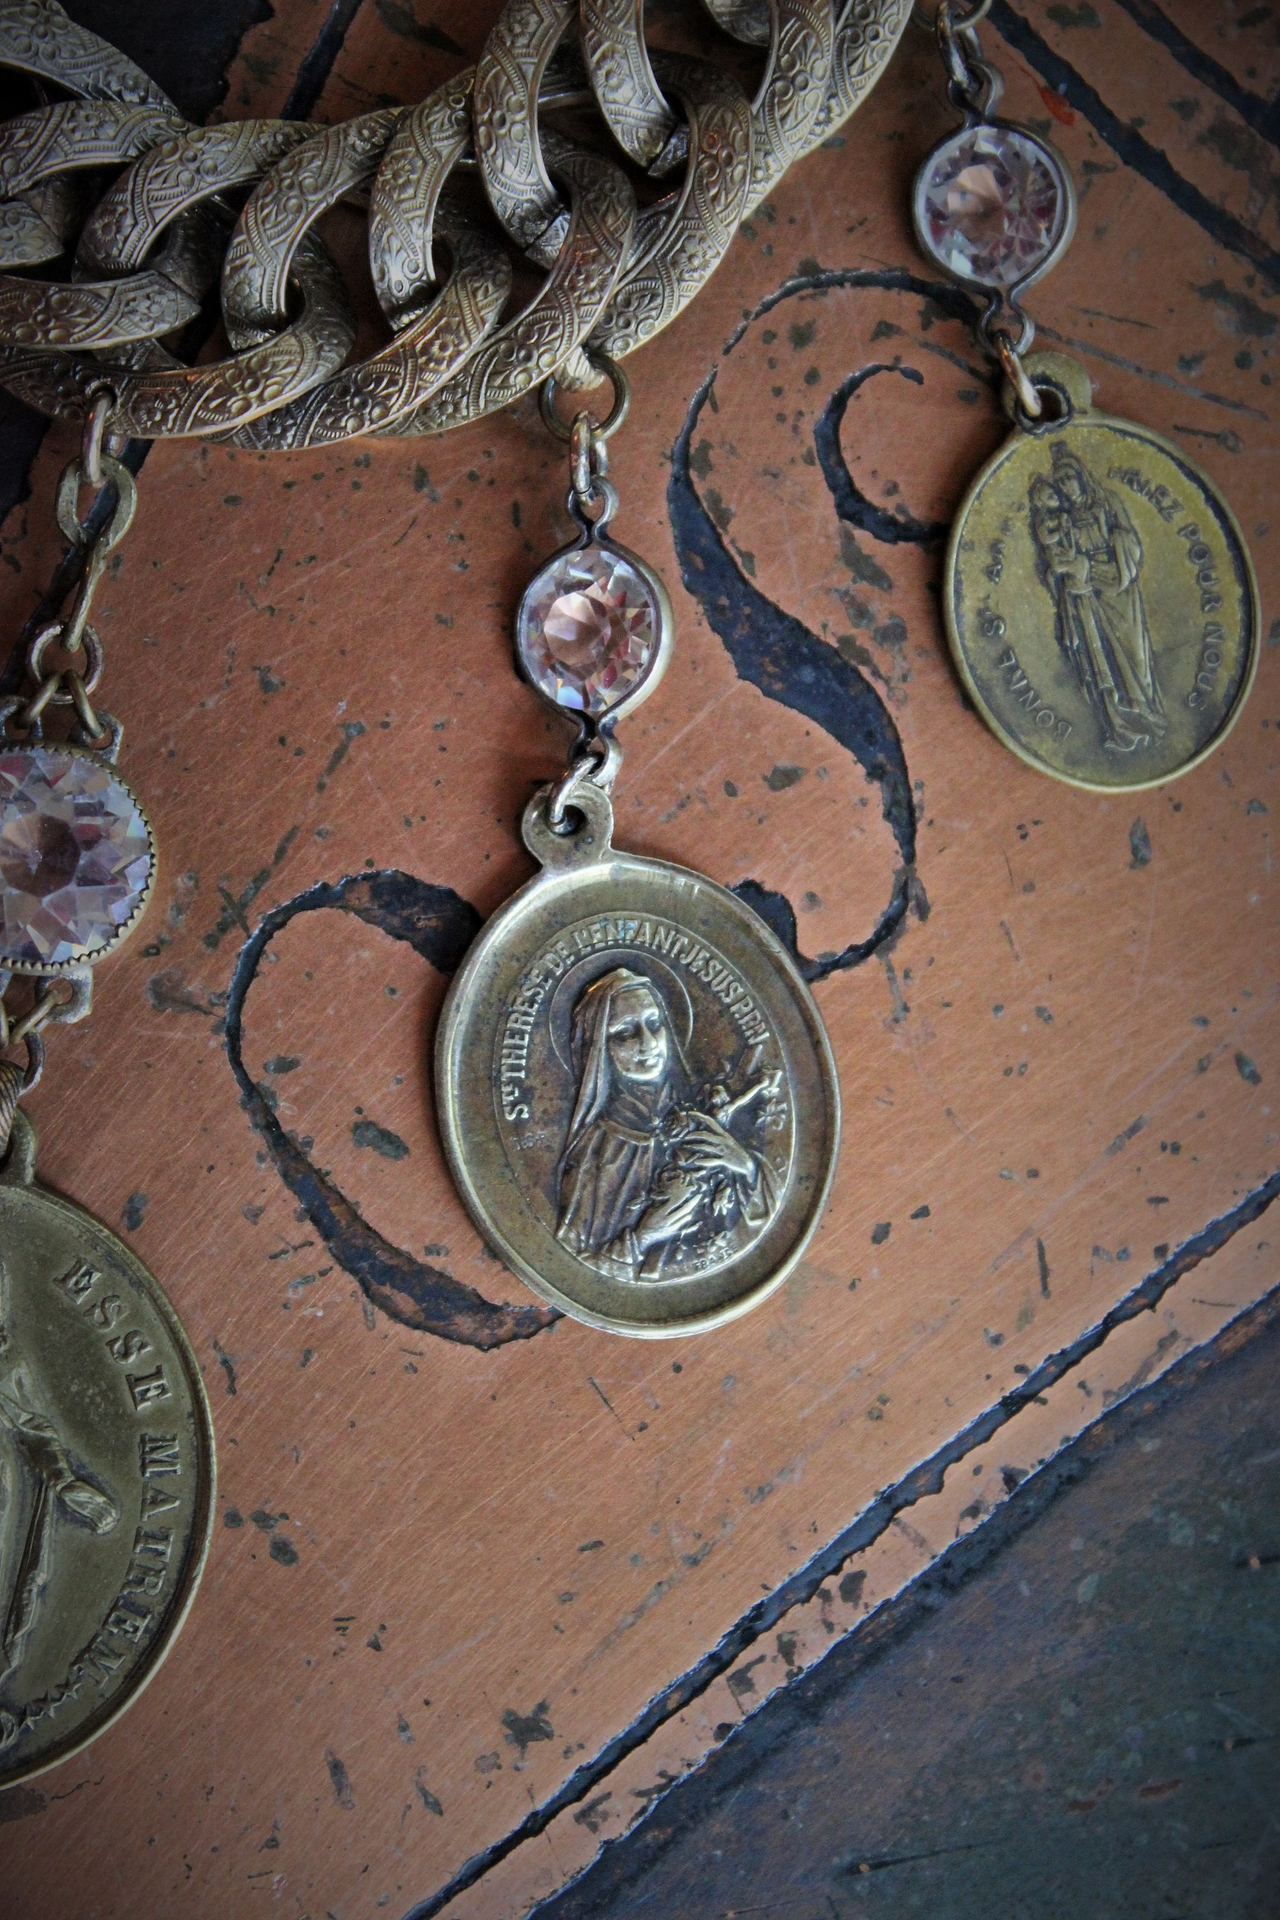 Show Yourself a Mother Necklace w/Exceptional Antique French Marian Medal, Antique Bezel Set Faceted Rock Crystal Connectors, Antique Embossed Link Chain